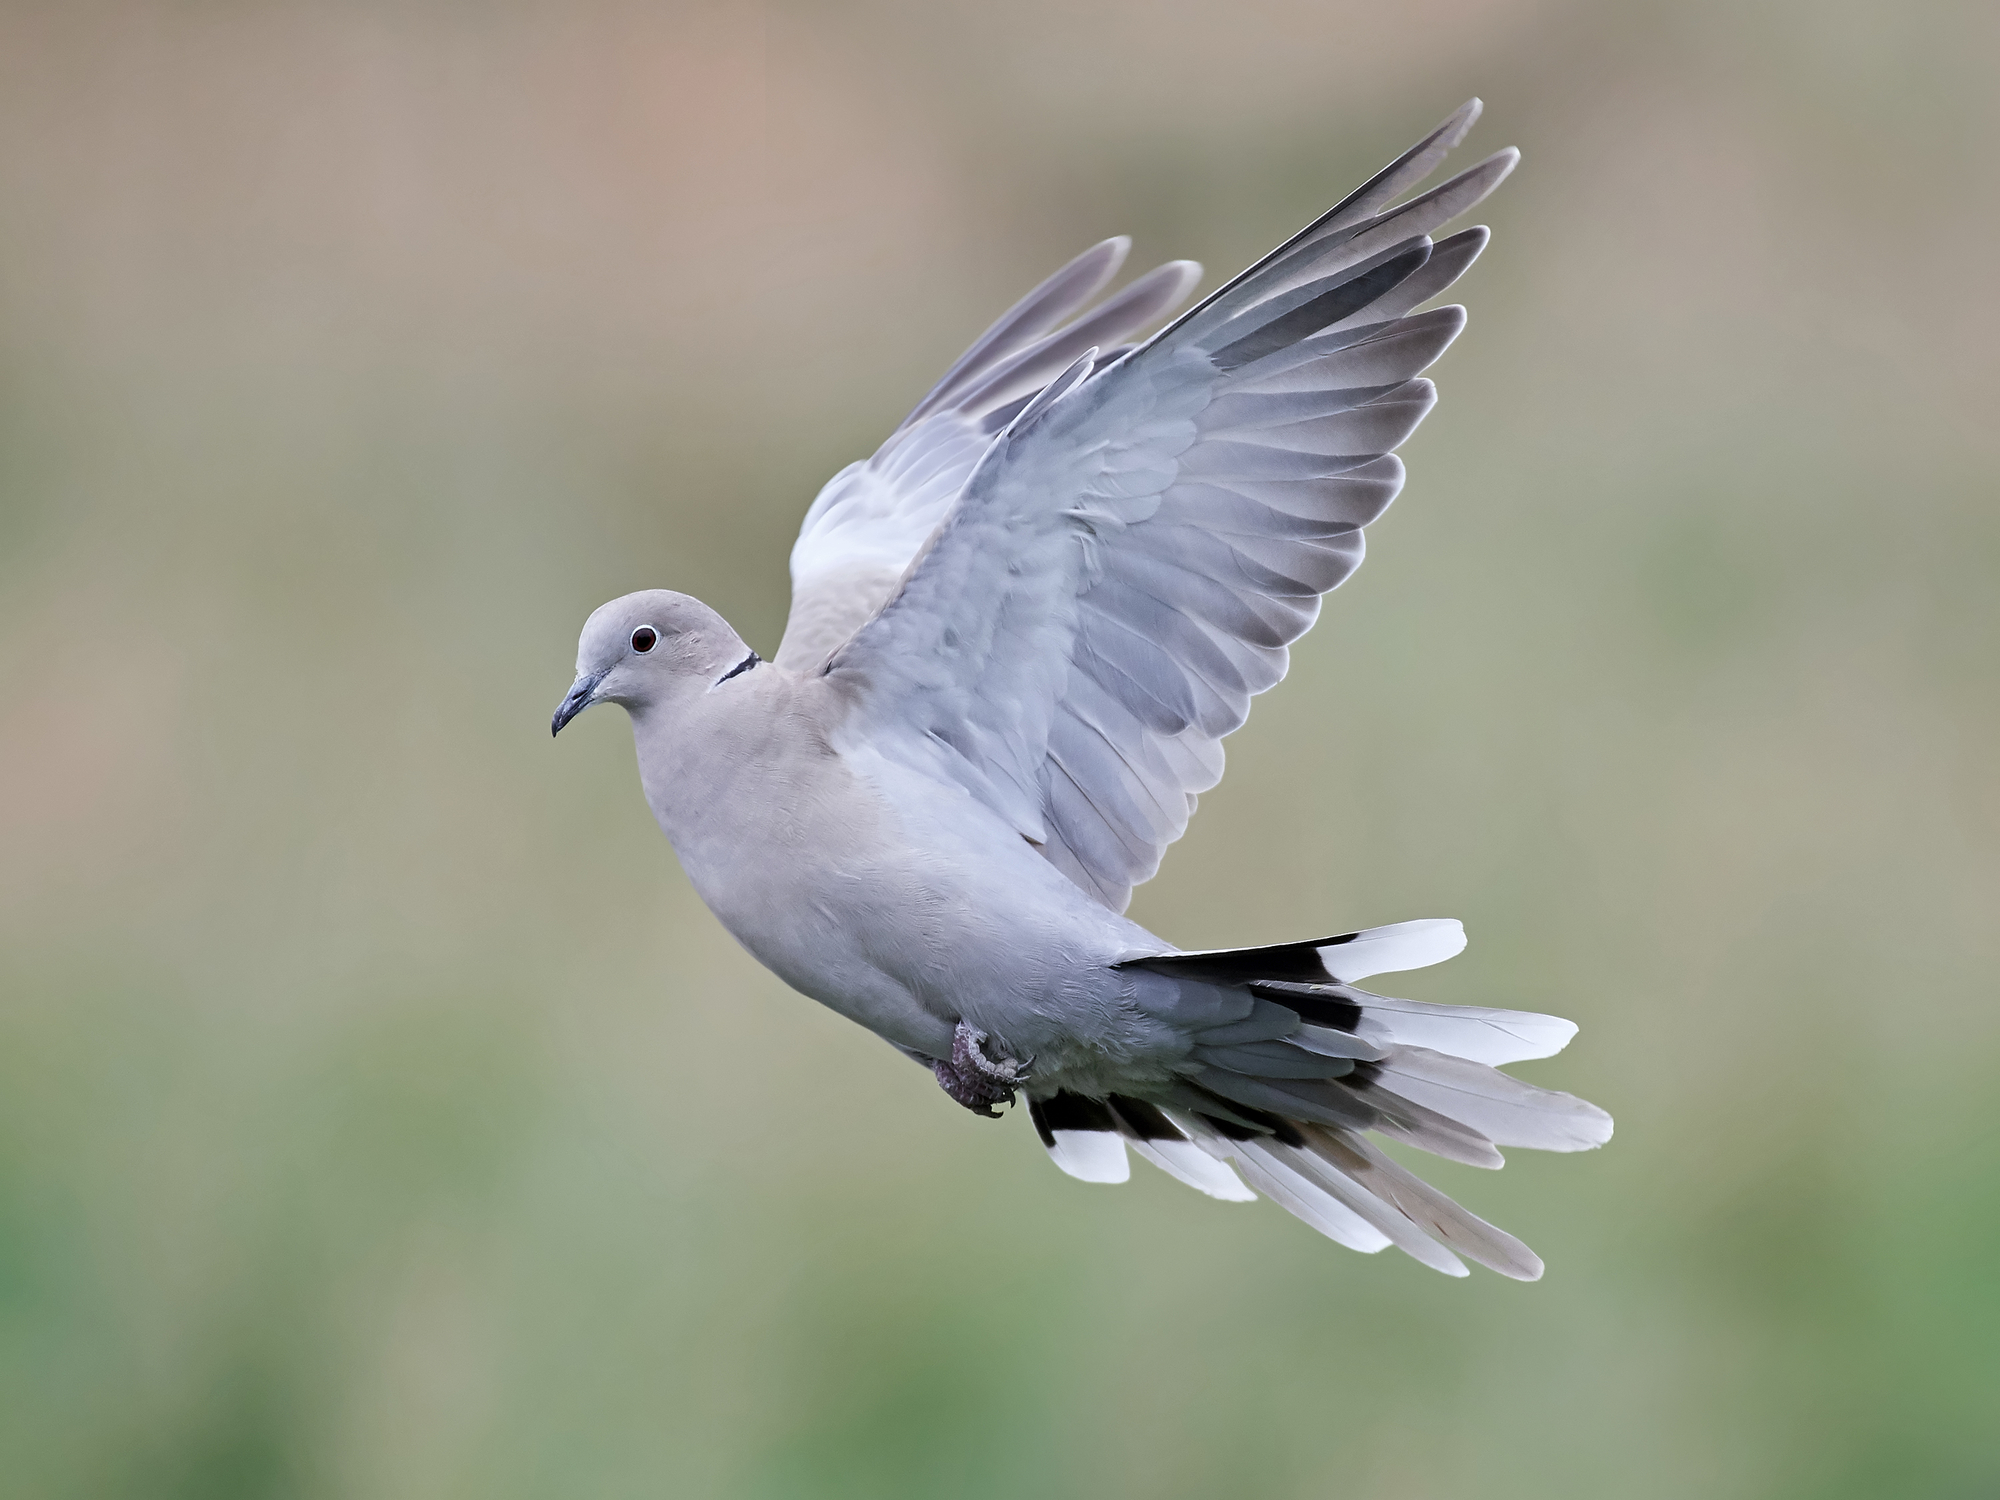 What Is The Diet Of Collared Doves?